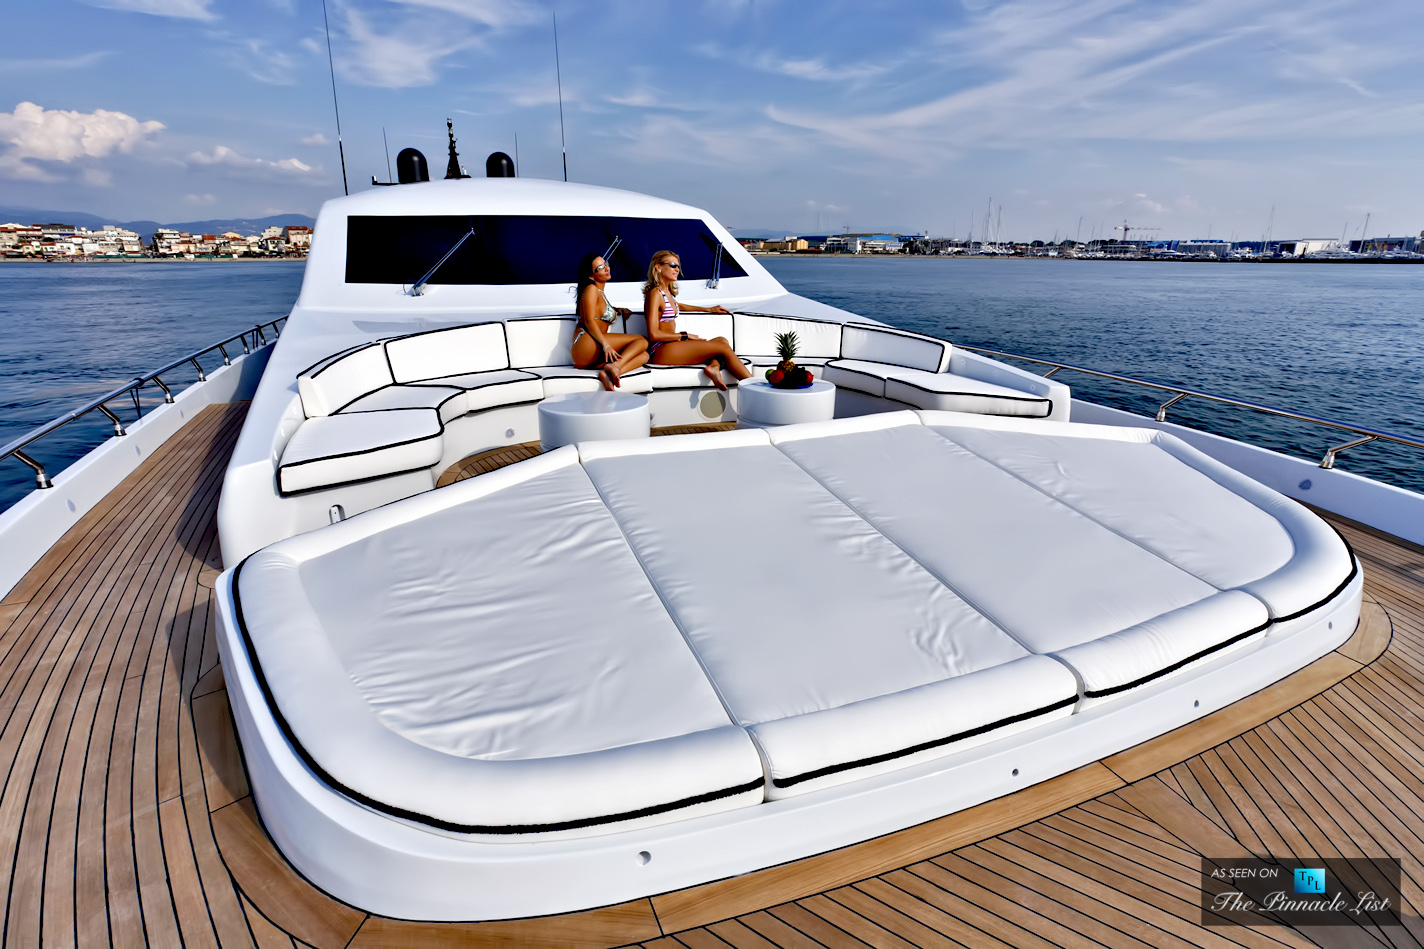 Jajaro – Five Luxury Superyachts Available for a Summer Charter